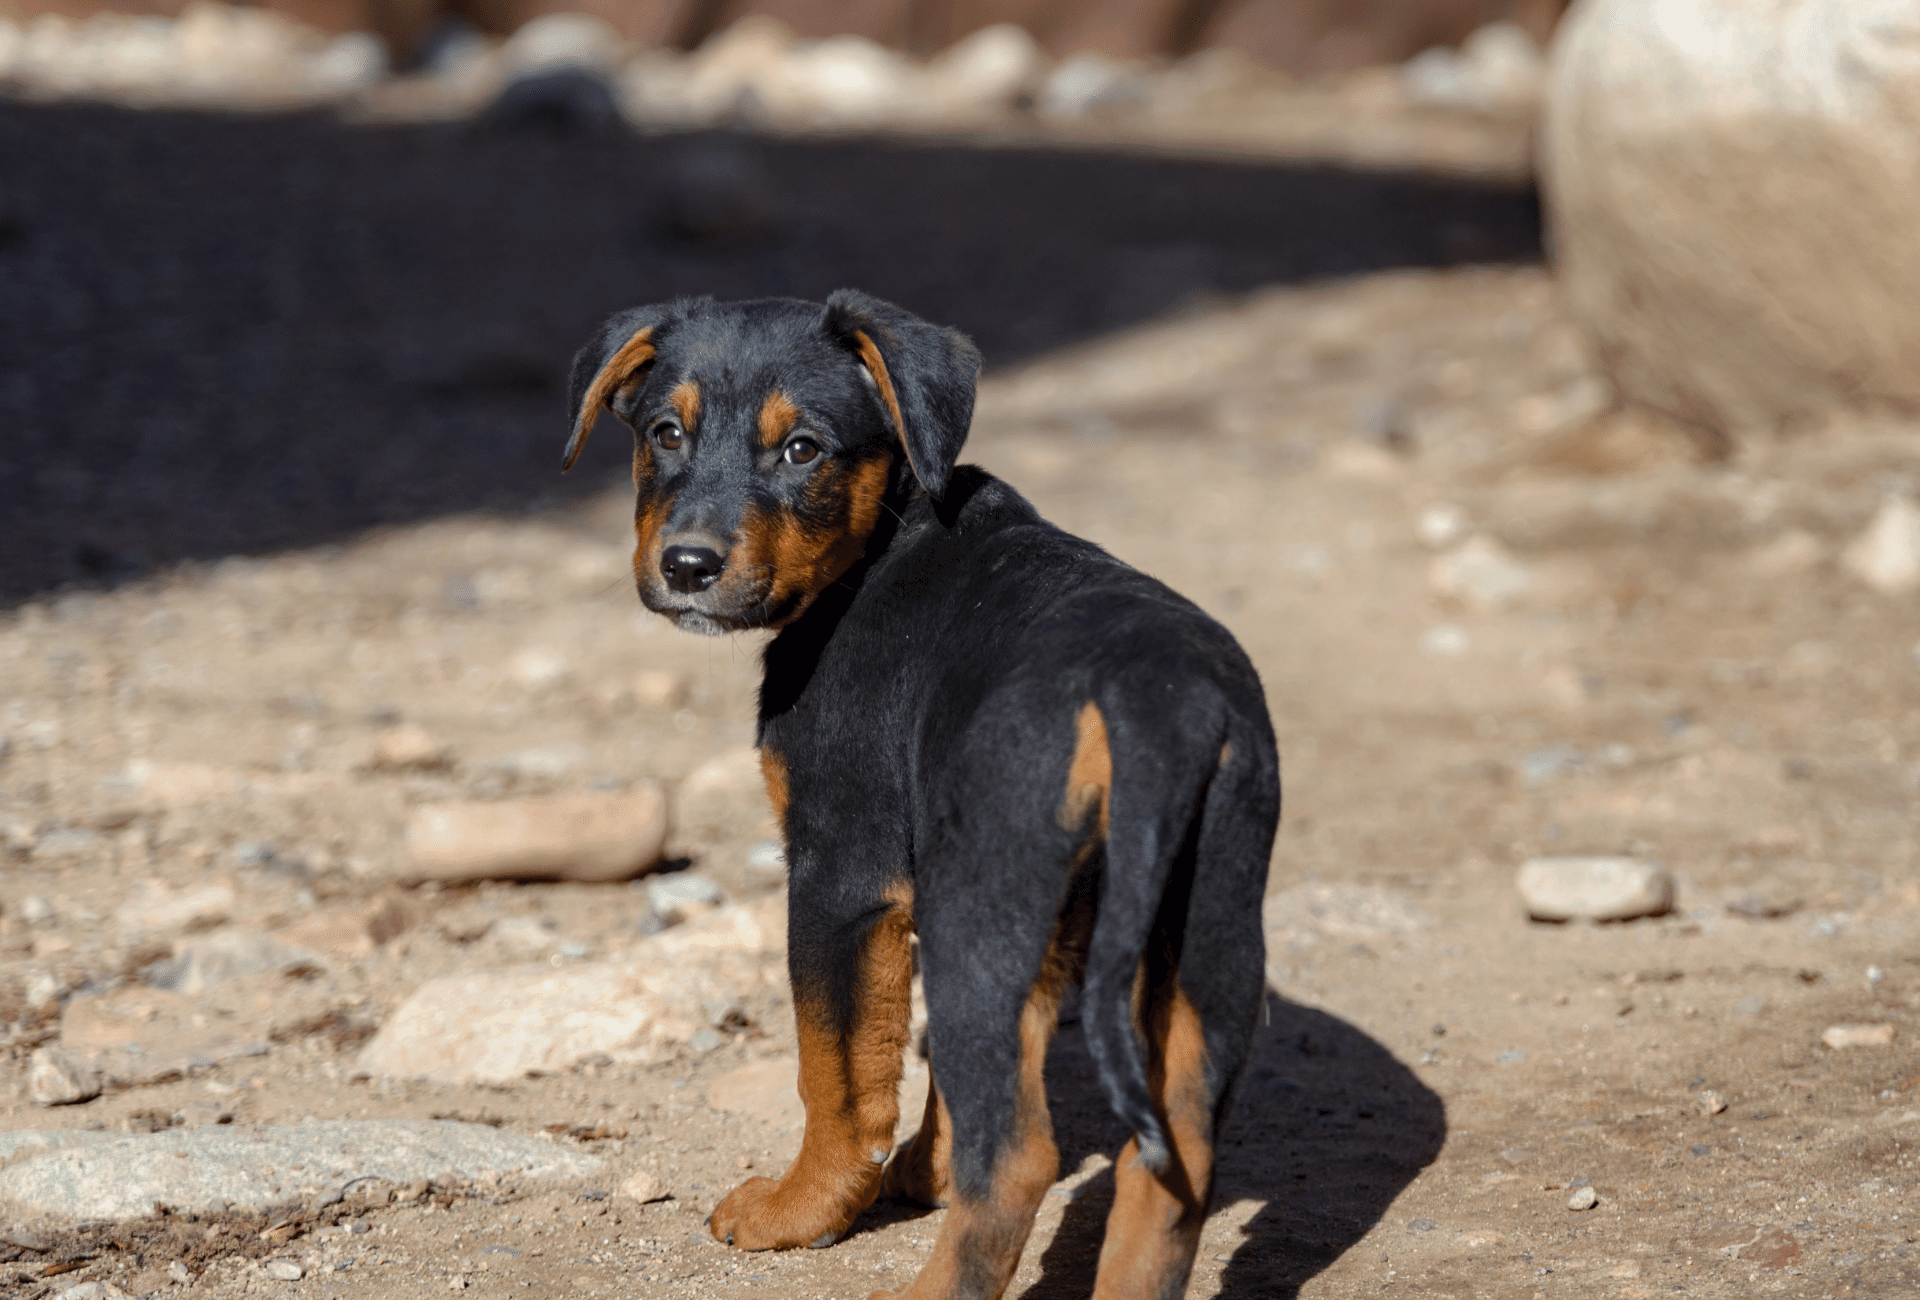 German Shepherd Rottweiler puppy mixed breed with black and tan coat color.